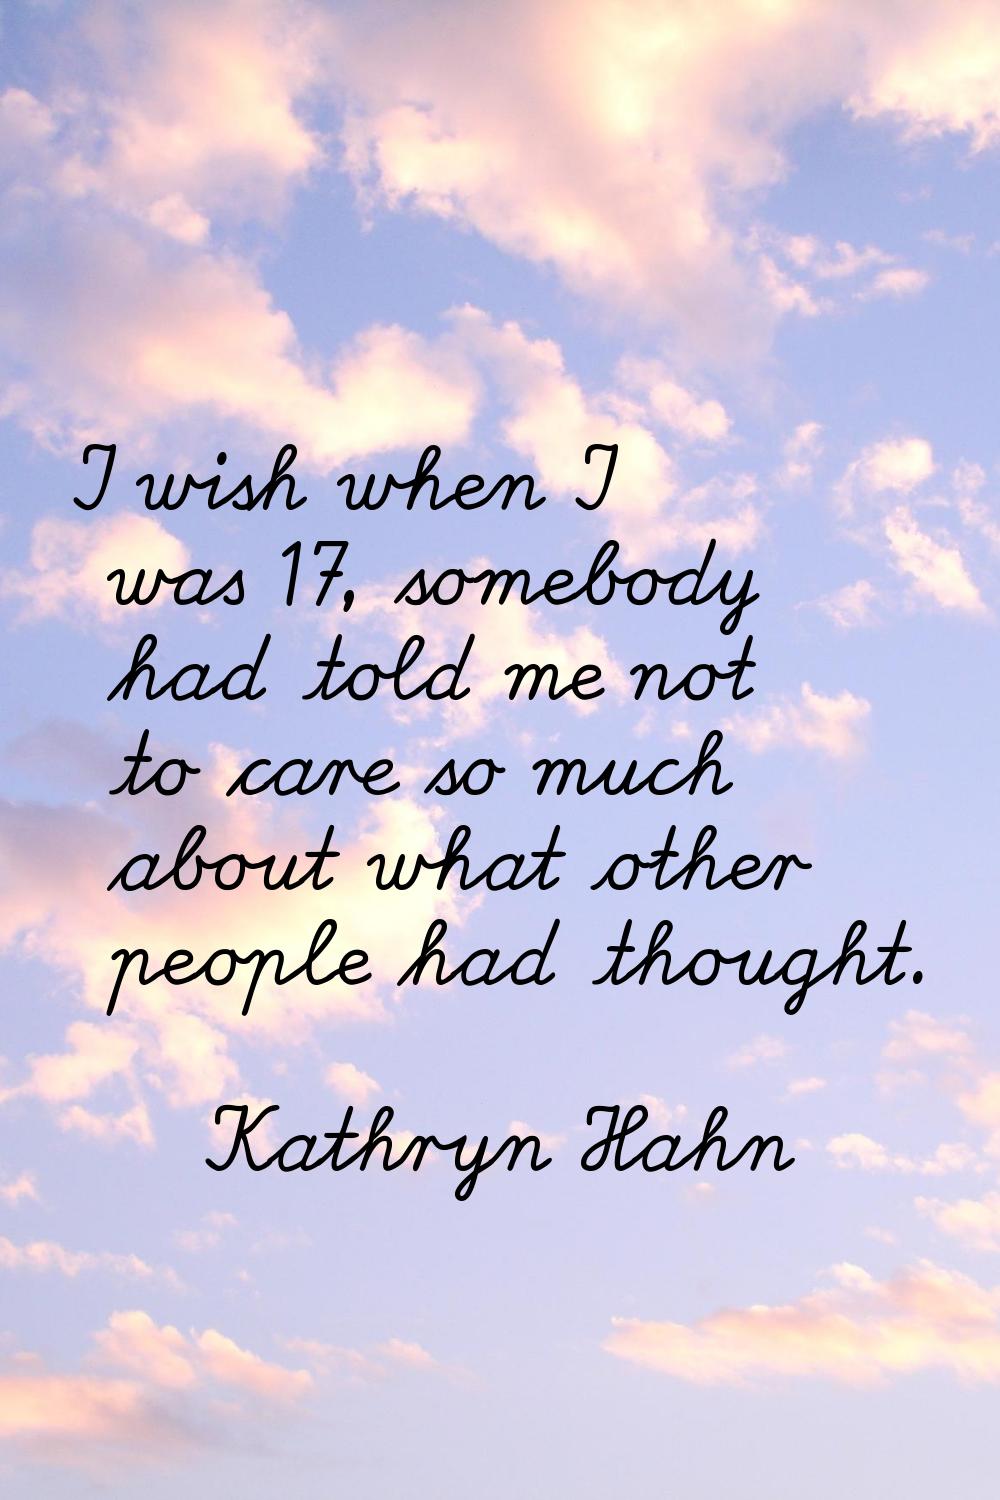 I wish when I was 17, somebody had told me not to care so much about what other people had thought.